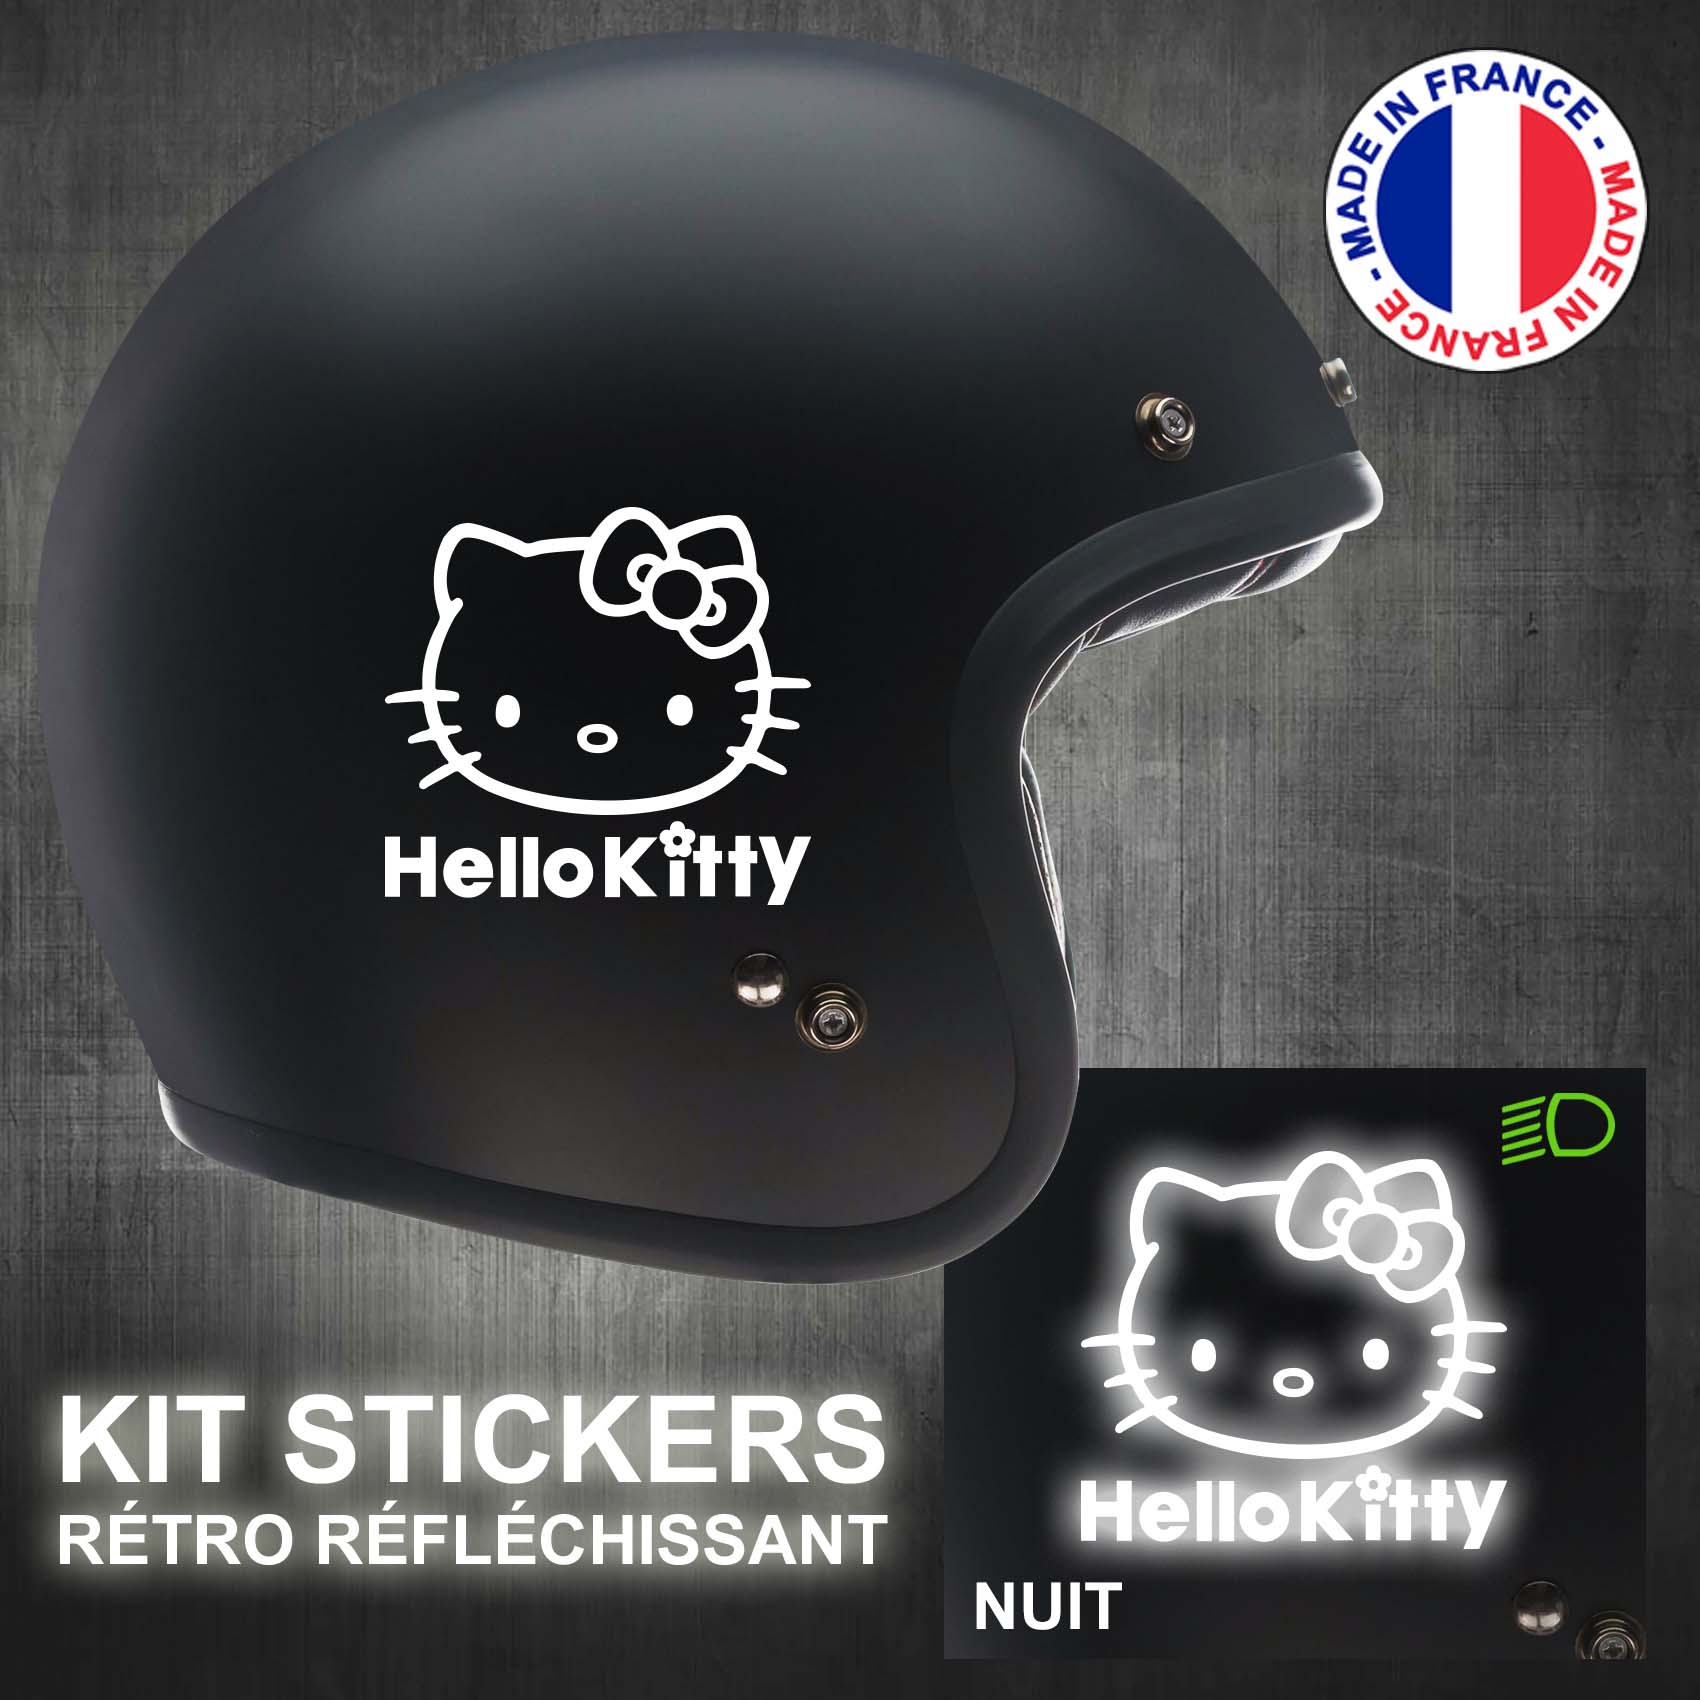 stickers-casque-moto-hello-kitty-ref1-retro-reflechissant-autocollant-noir-moto-velo-tuning-racing-route-sticker-casques-adhesif-scooter-nuit-securite-decals-personnalise-personnalisable-min